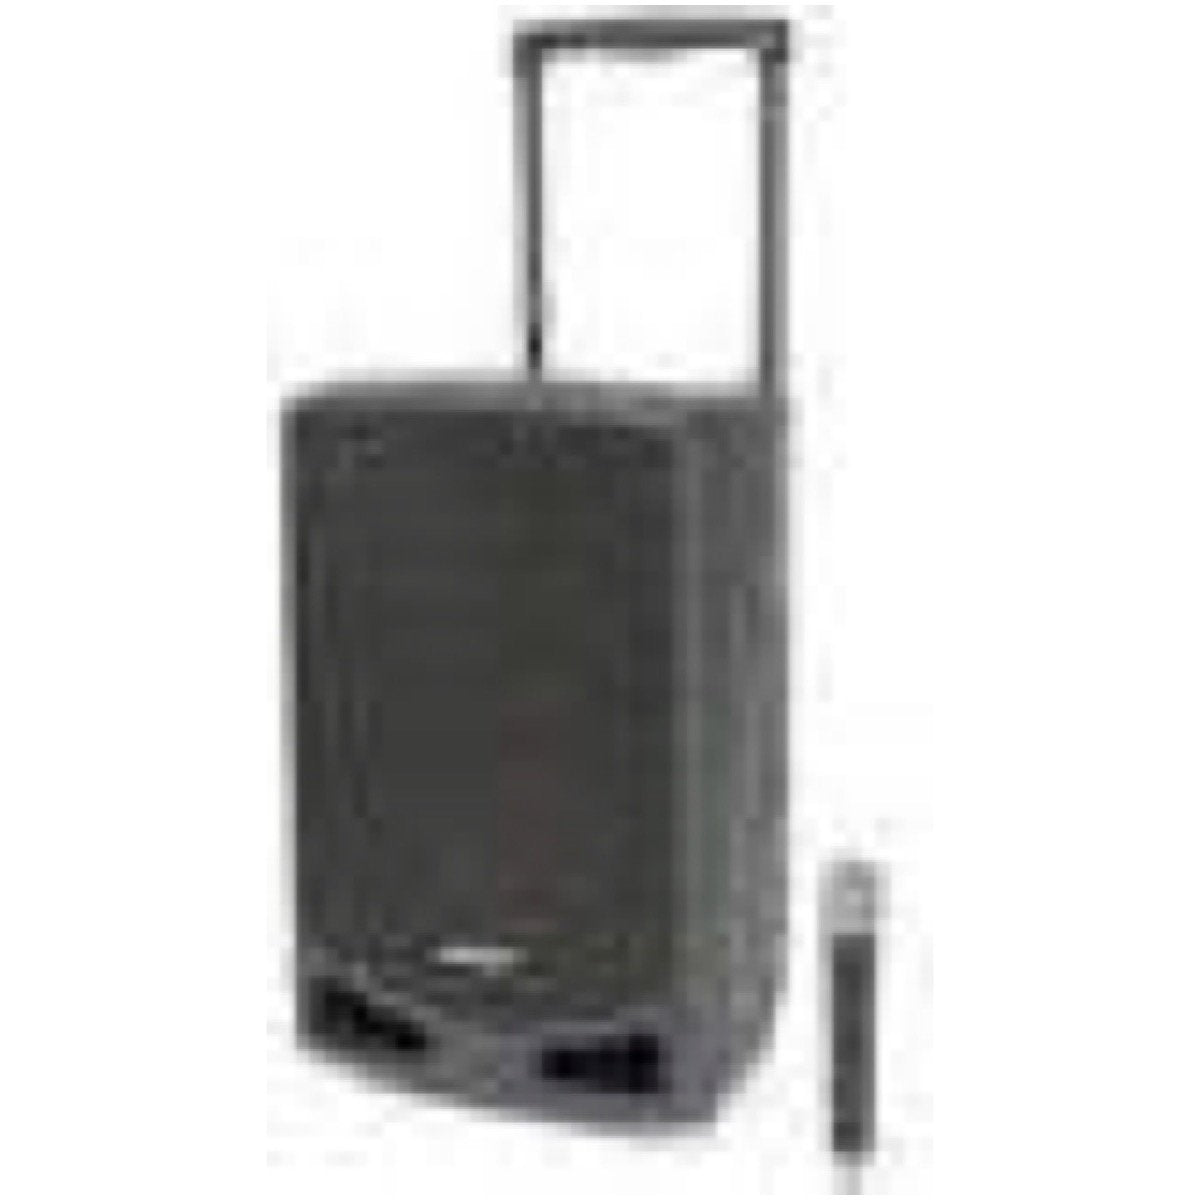 Samson XP312w Rechargeable Portable PA System, Band D (542-566 MHz)